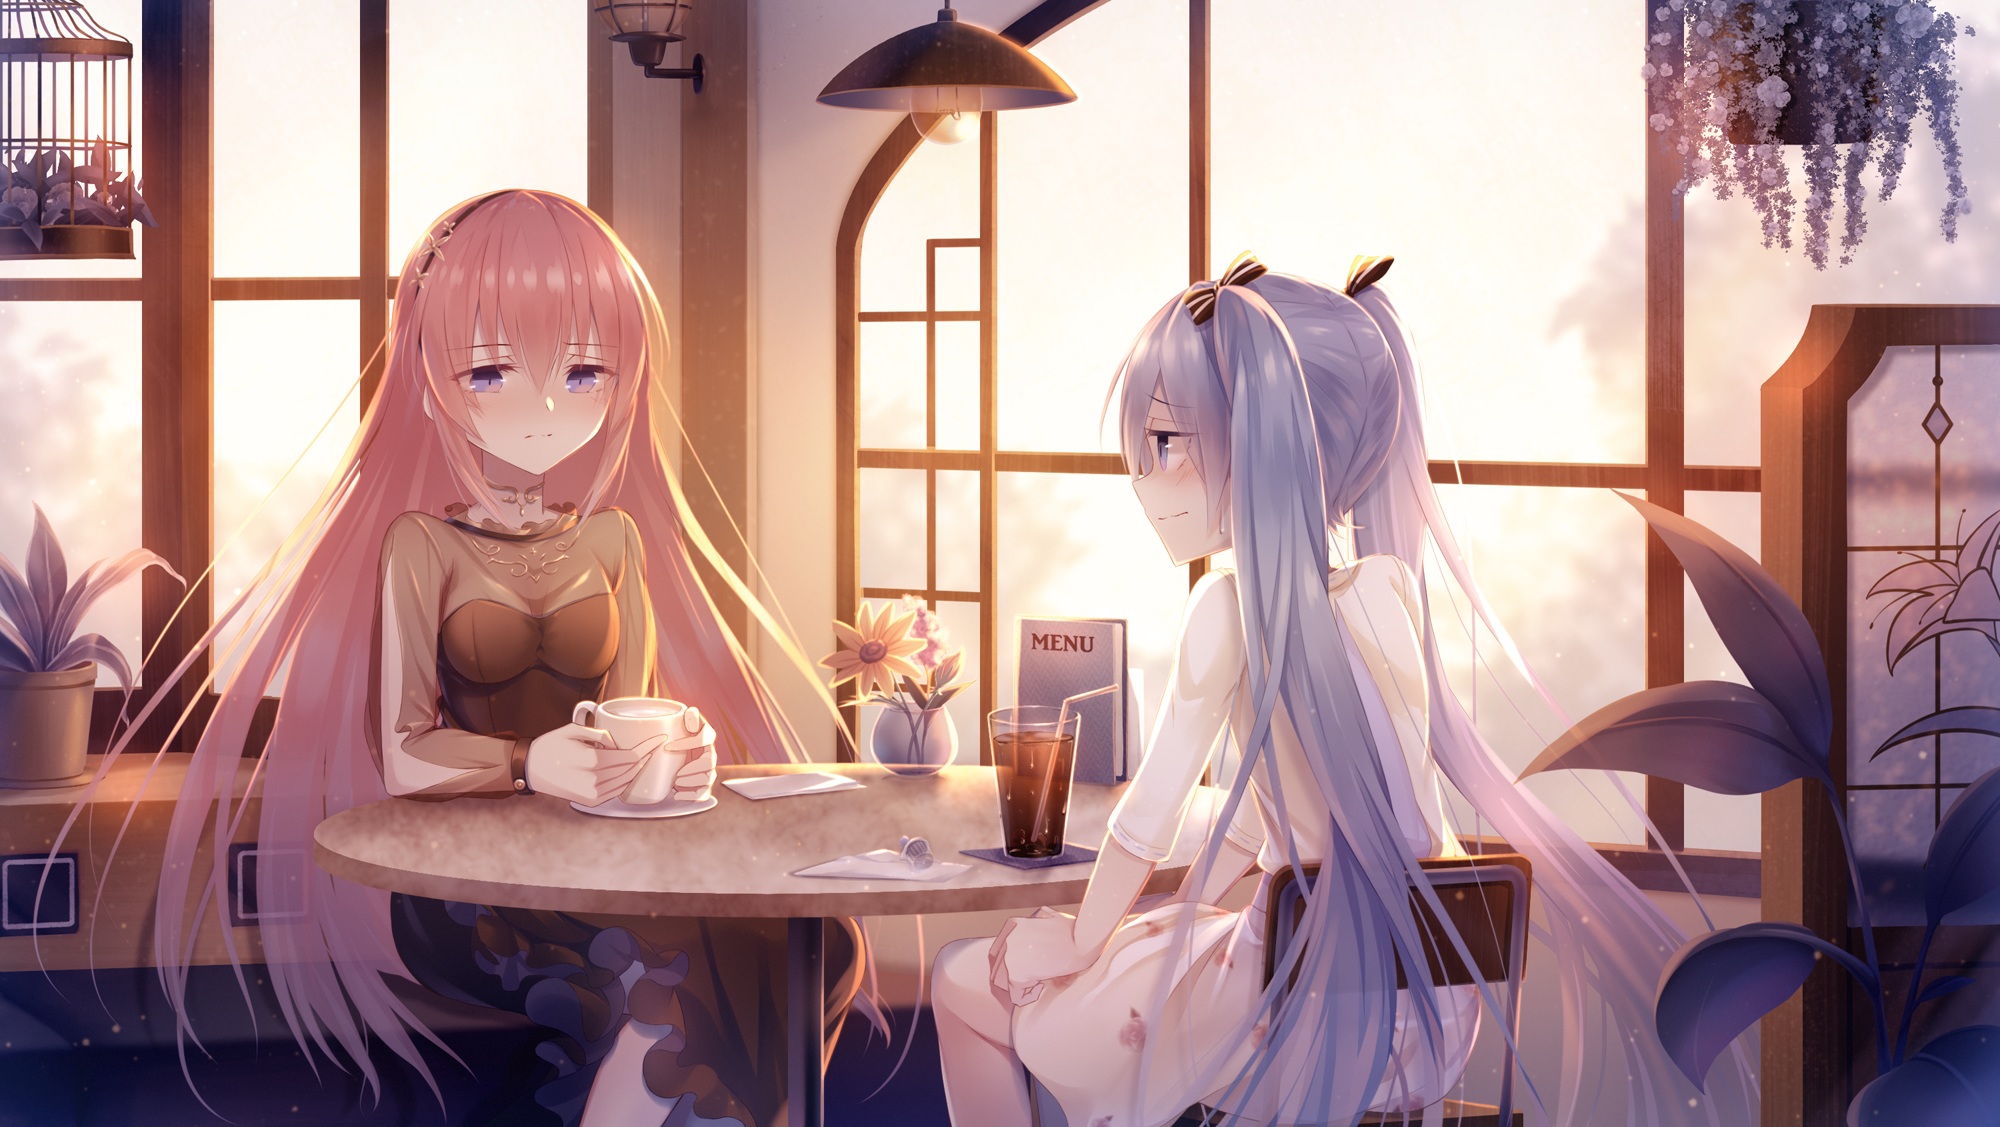 Anime 2000x1127 anime anime girls two women sitting table cup drinking glass long hair women indoors twintails pink hair blue hair dress cafe Hatsune Miku Megurine Luka Vocaloid